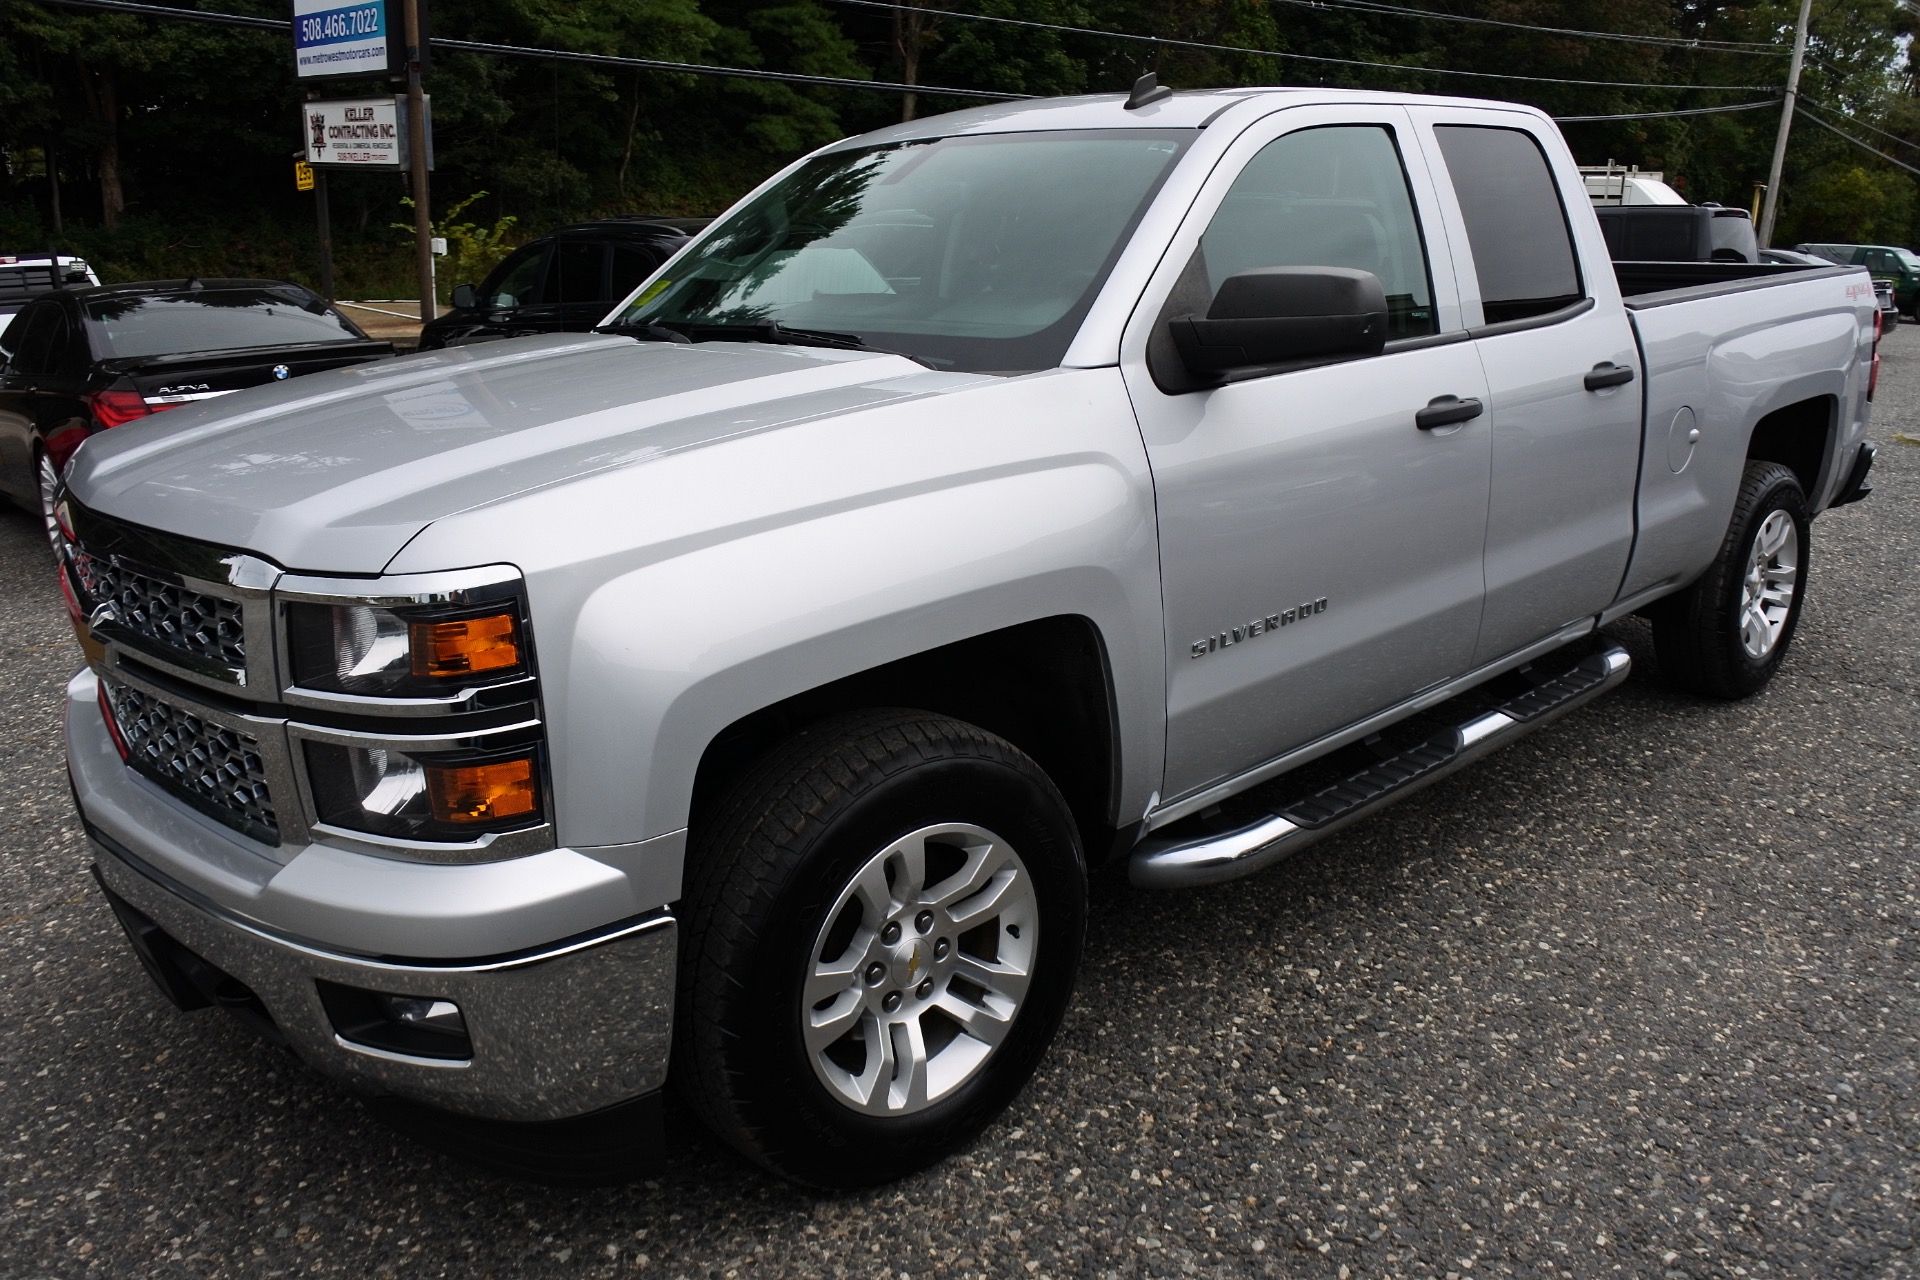 Used 14 Chevrolet Silverado 1500 4wd Double Cab 143 5 Lt W 1lt For Sale Special Pricing Metro West Motorcars Llc Stock 3840